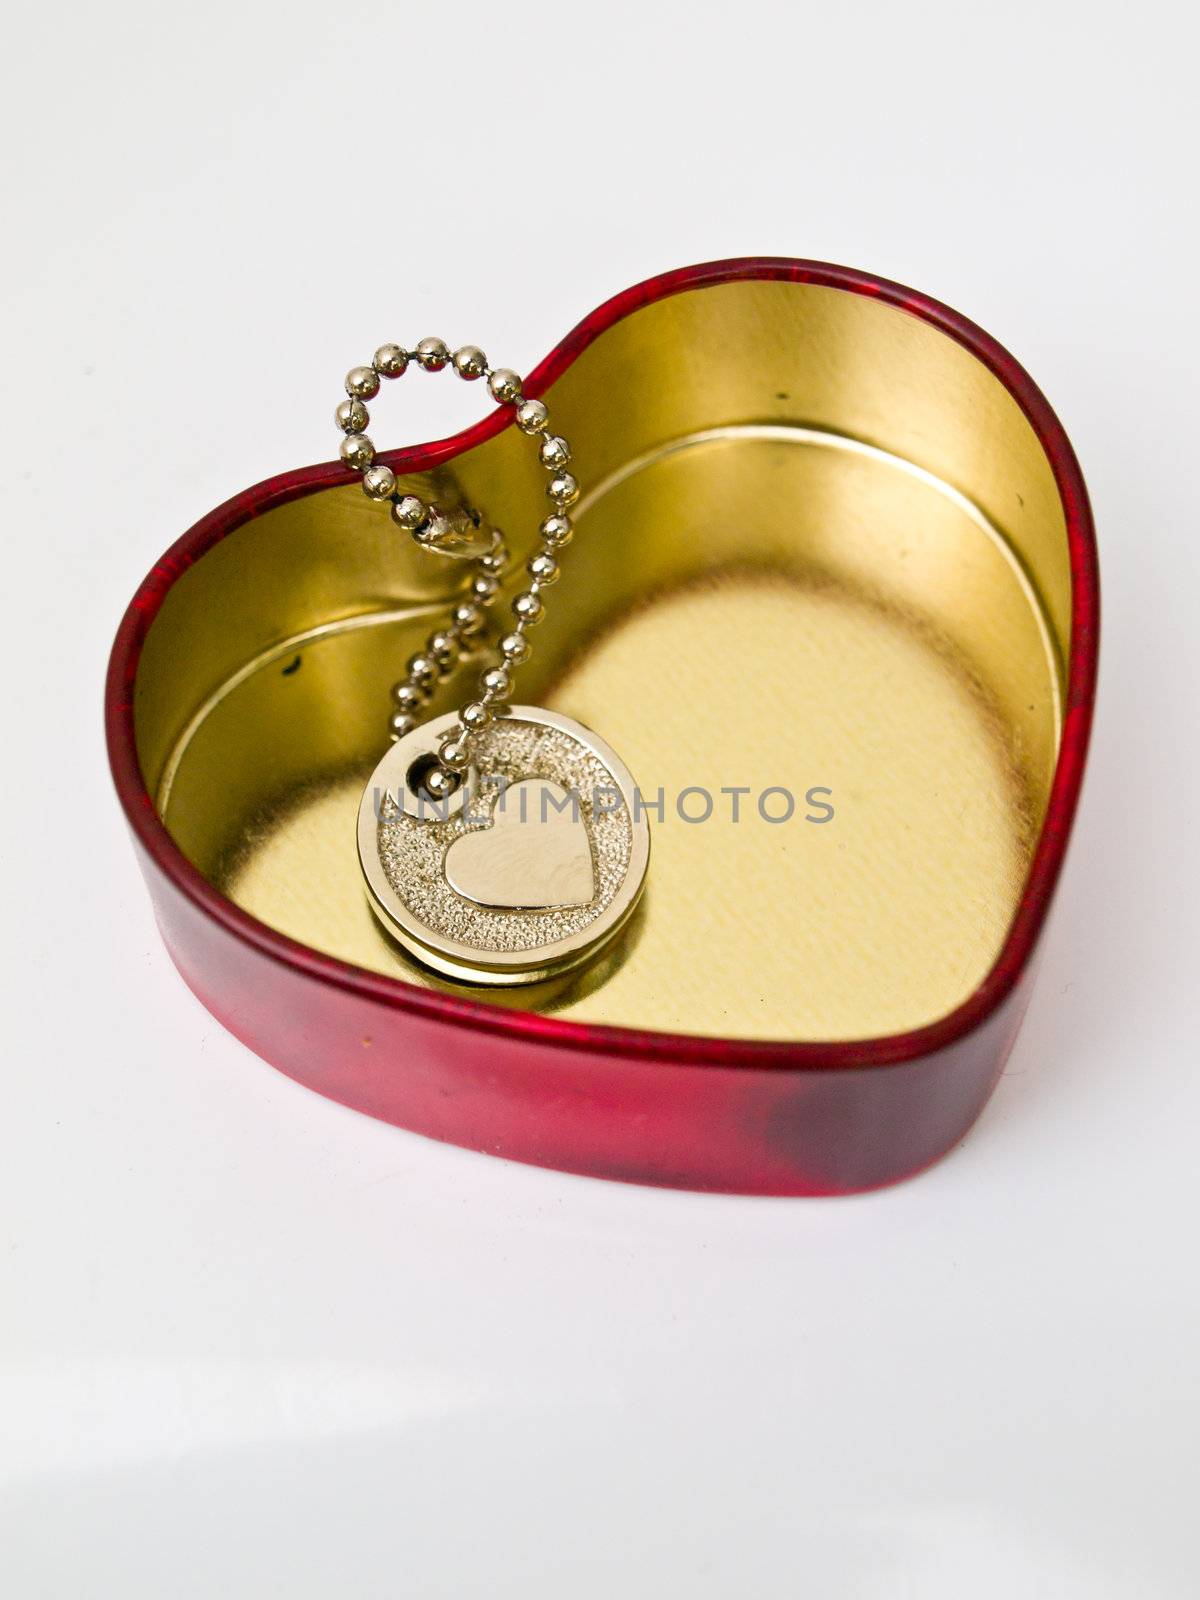 A golden stainless stell heart with a miniature heart keychain i by gururugu